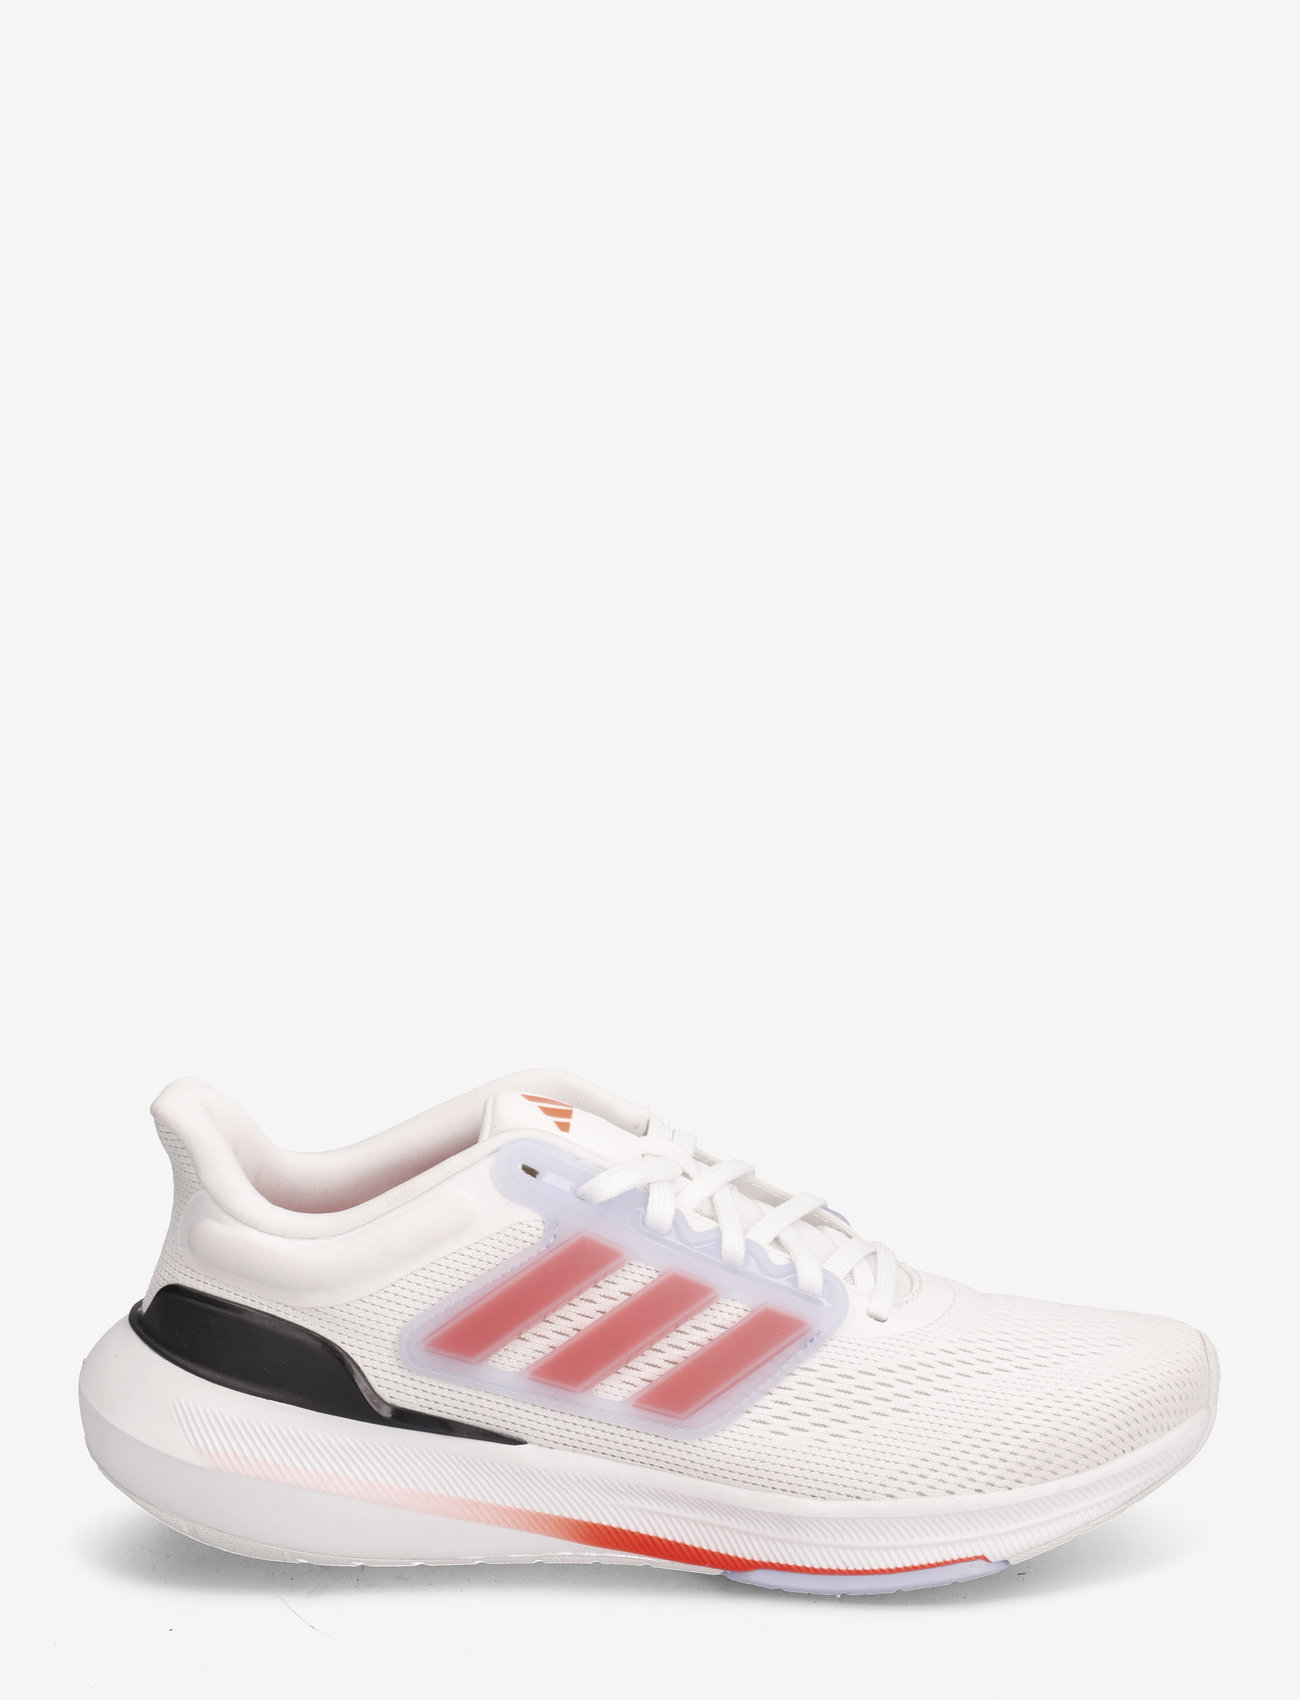 adidas Performance - Ultrabounce Shoes - løbesko - ftwwht/solred/crywht - 1